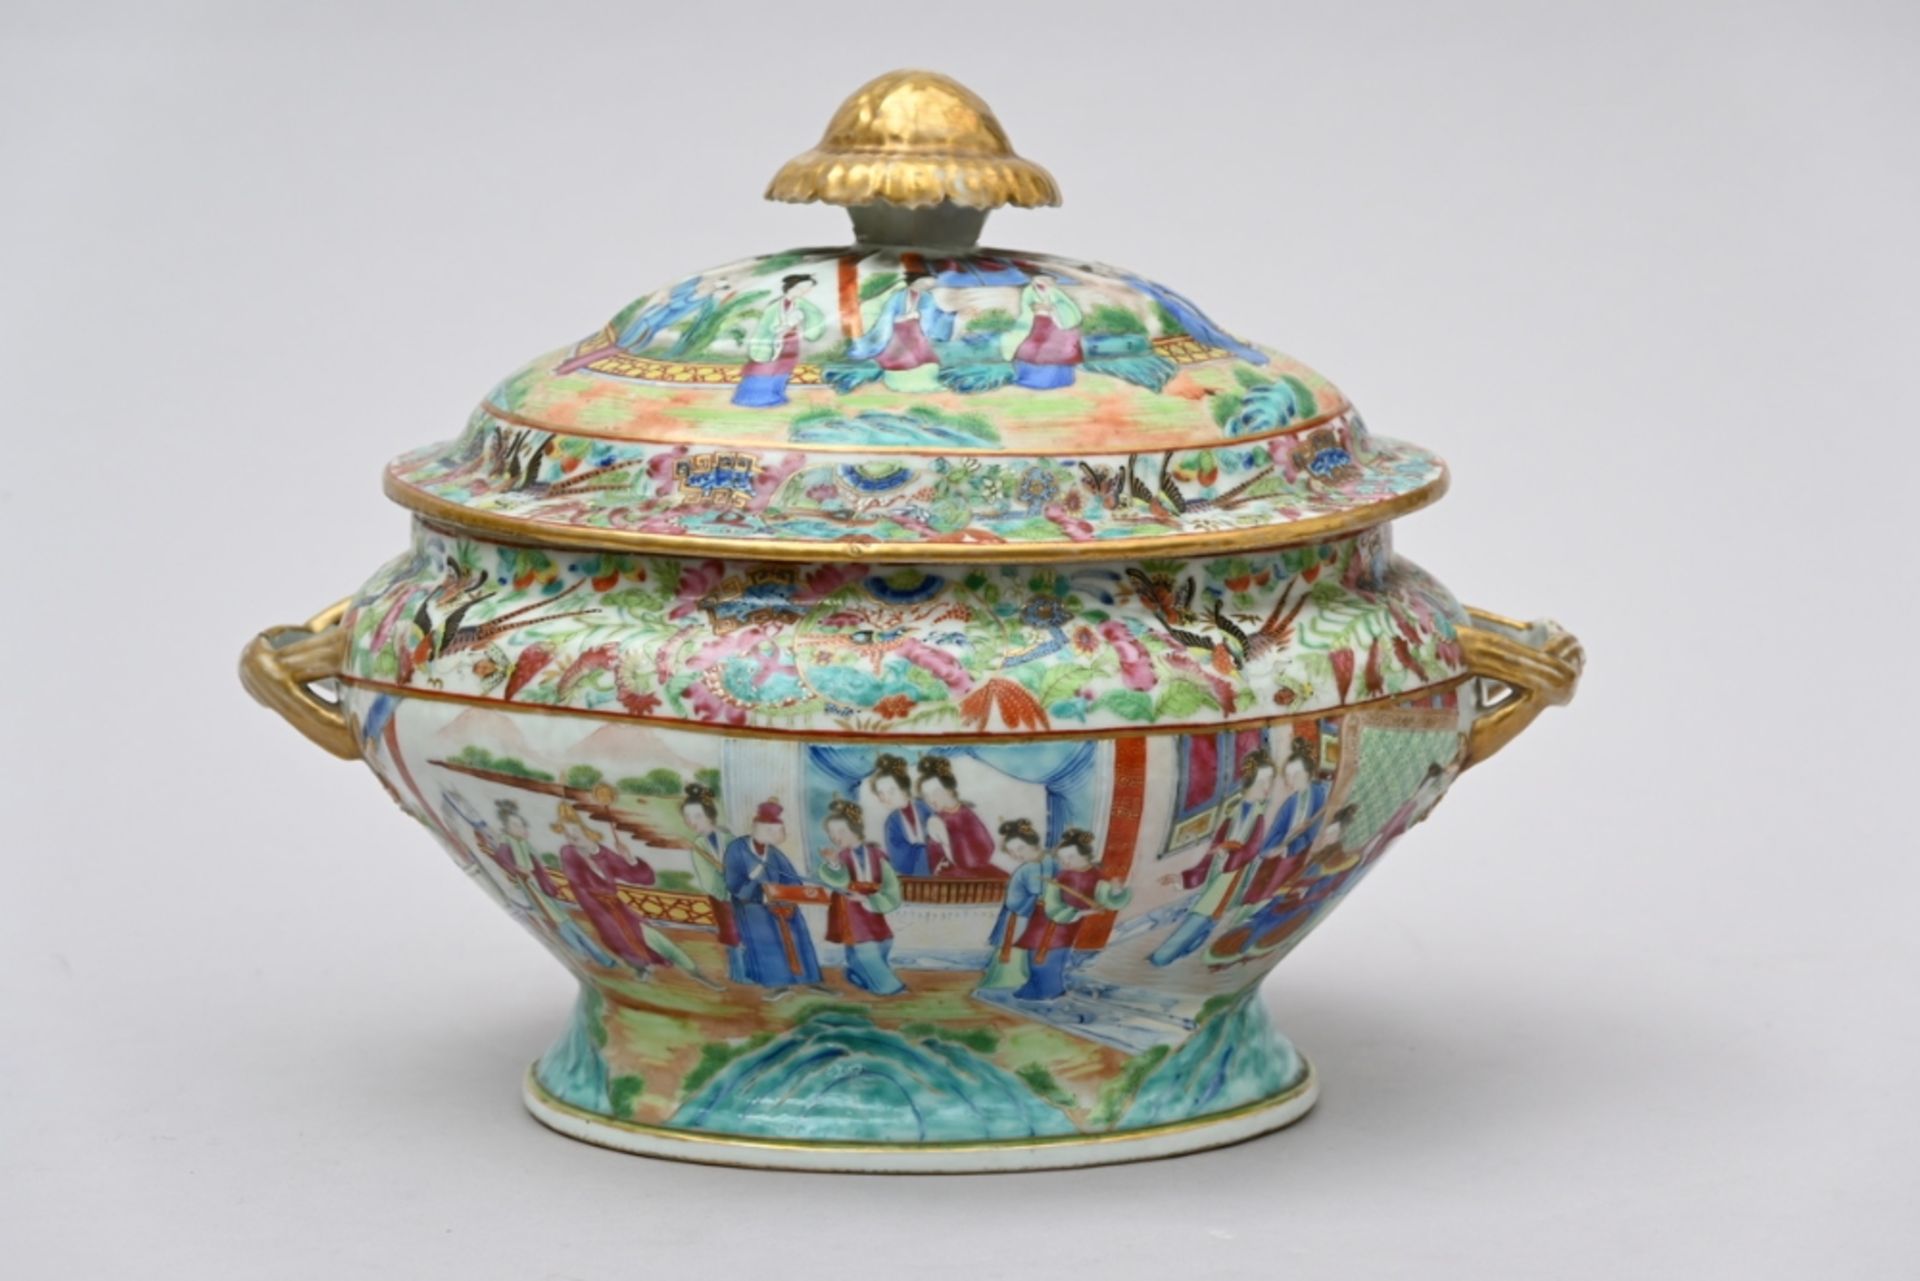 A Chinese porcelain tureen, Canton 19th century (27x35cm)